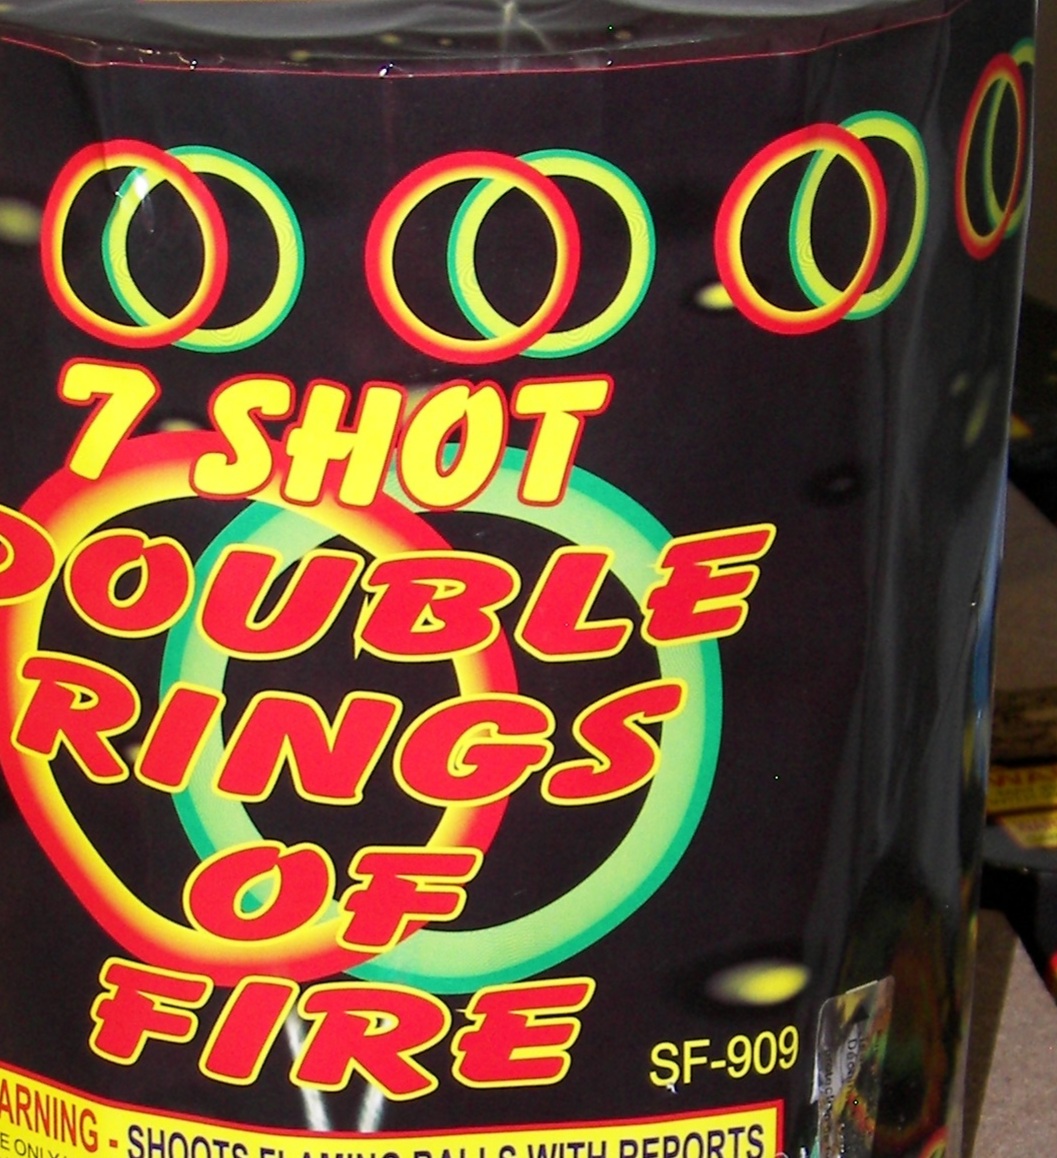 DOUBLE RINGS OF FIRE (Grand finale, 500 grams) main image